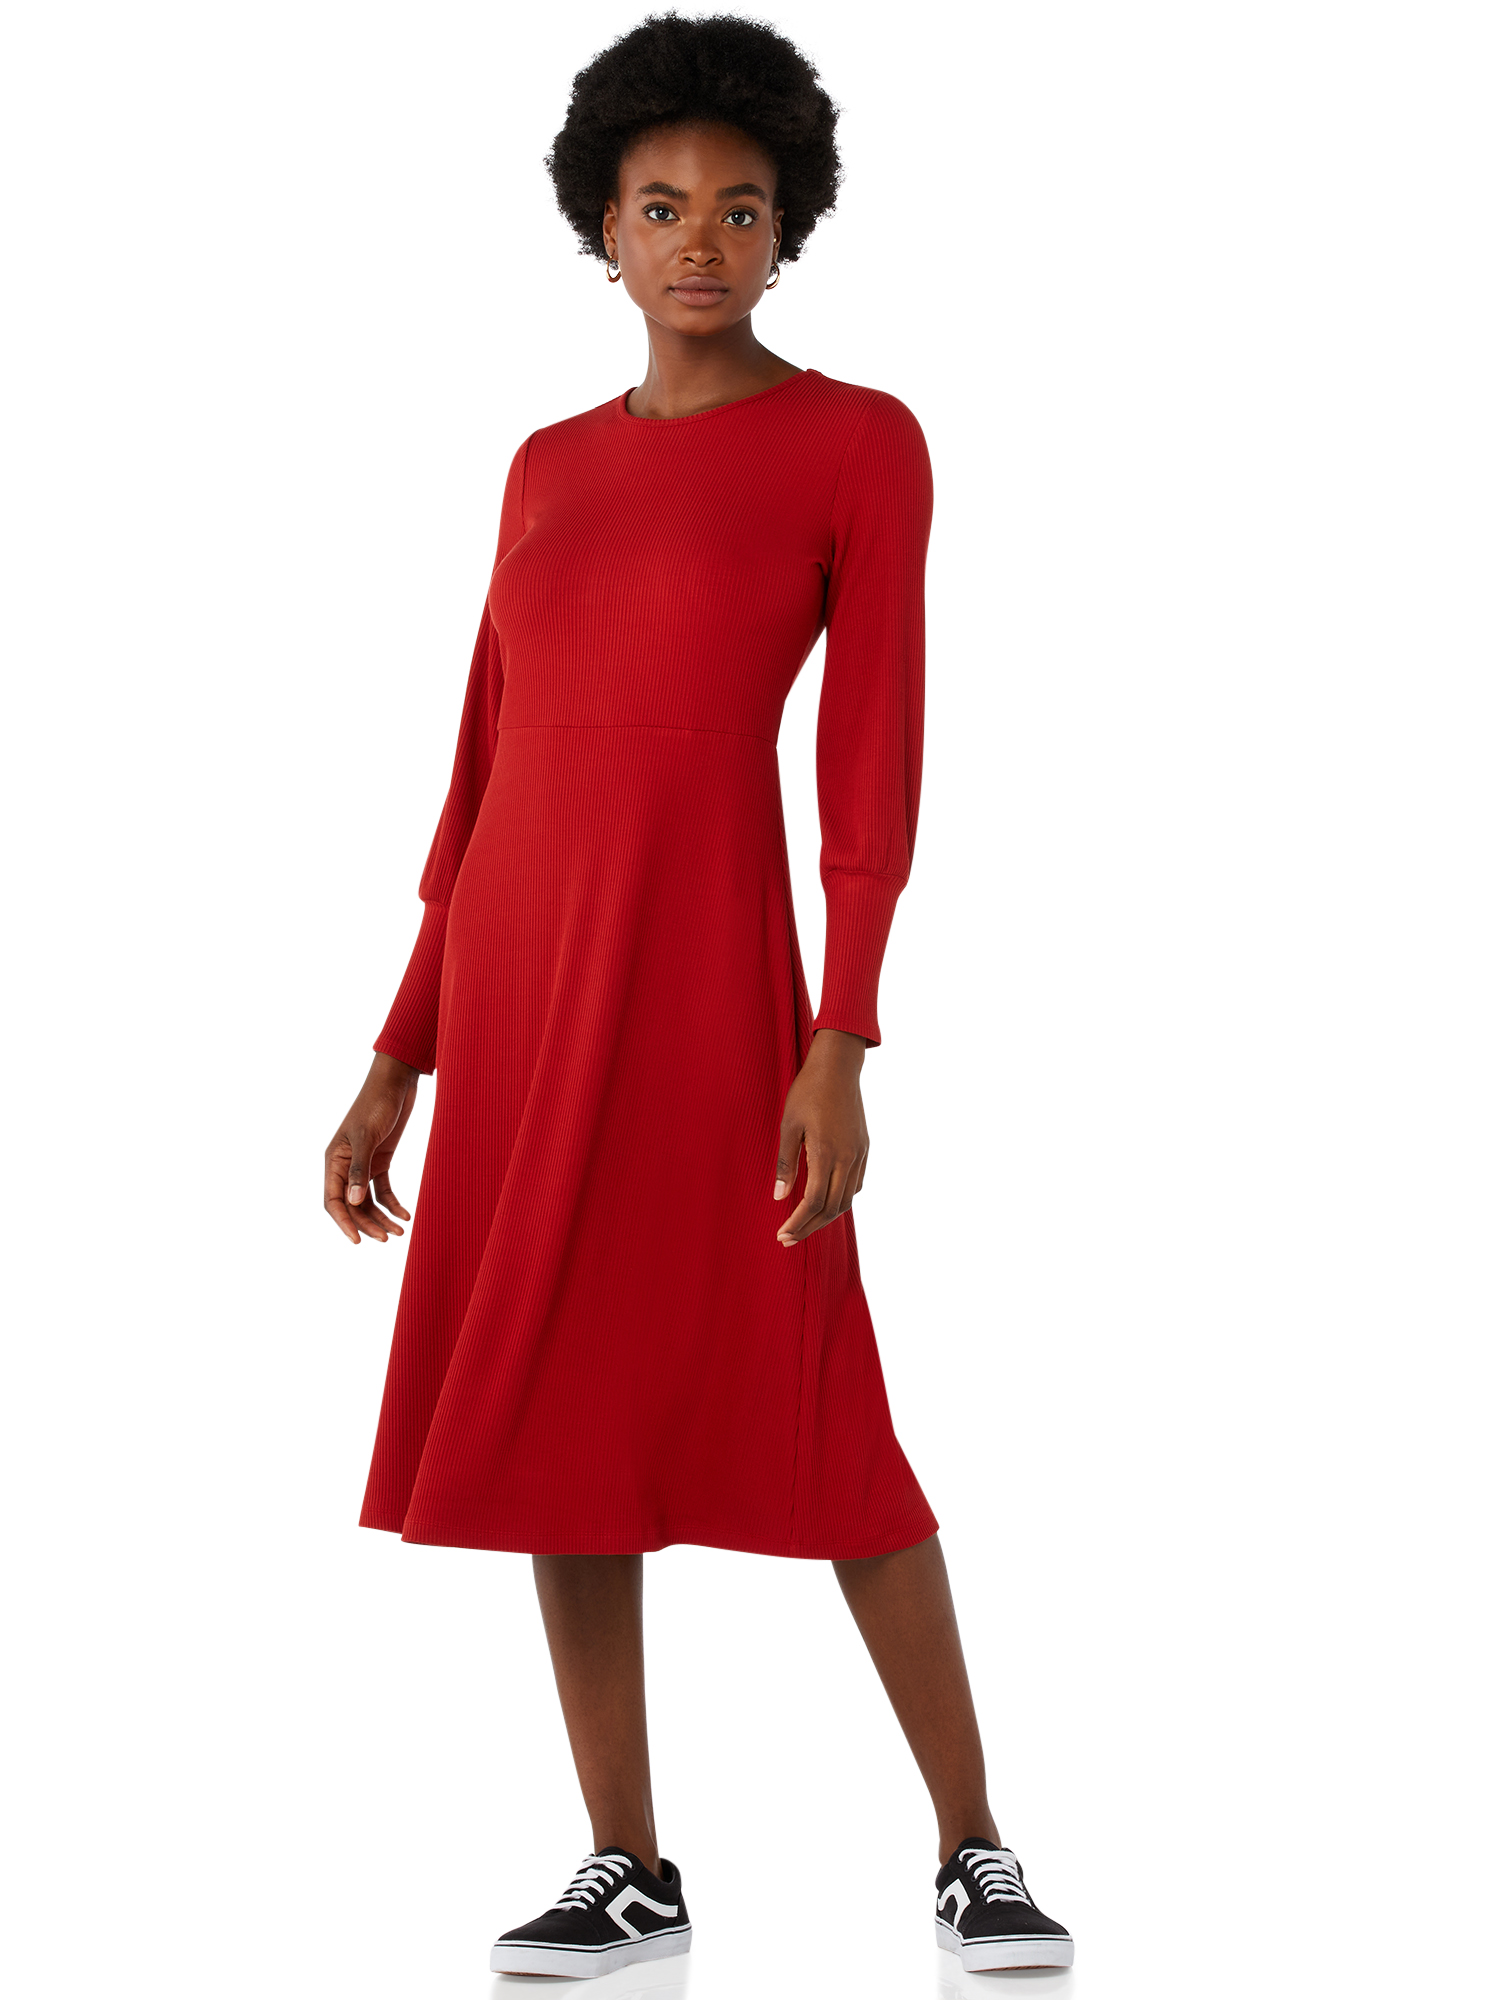 Free Assembly Women’s Fit & Flare Rib Knit Dress - image 1 of 6